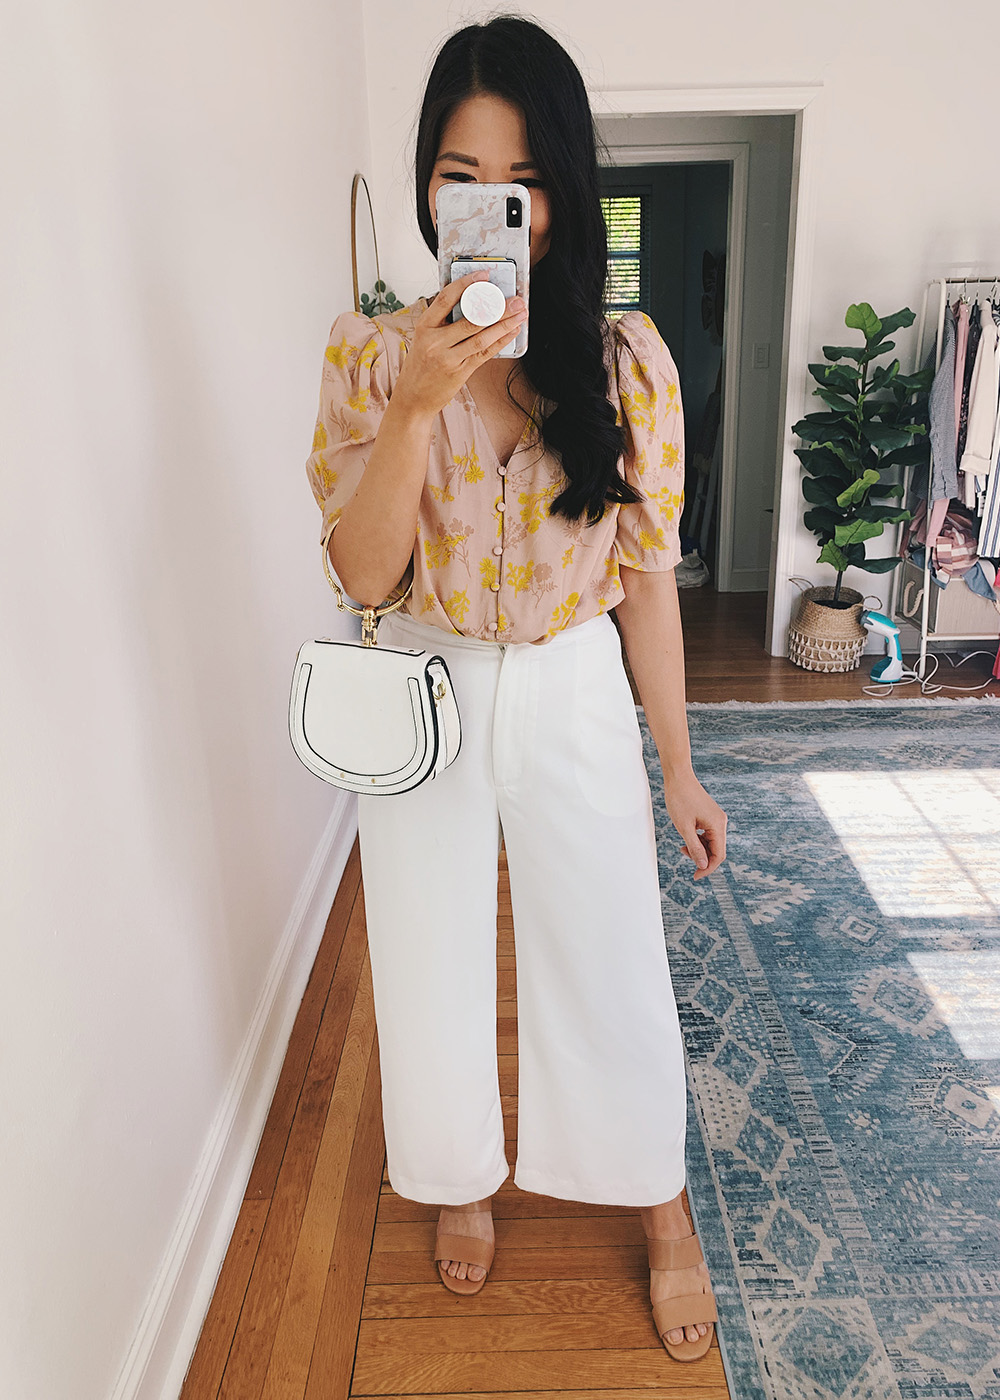 6 Cute & Colorful Outfits for Spring or Summer – Skirt The Rules